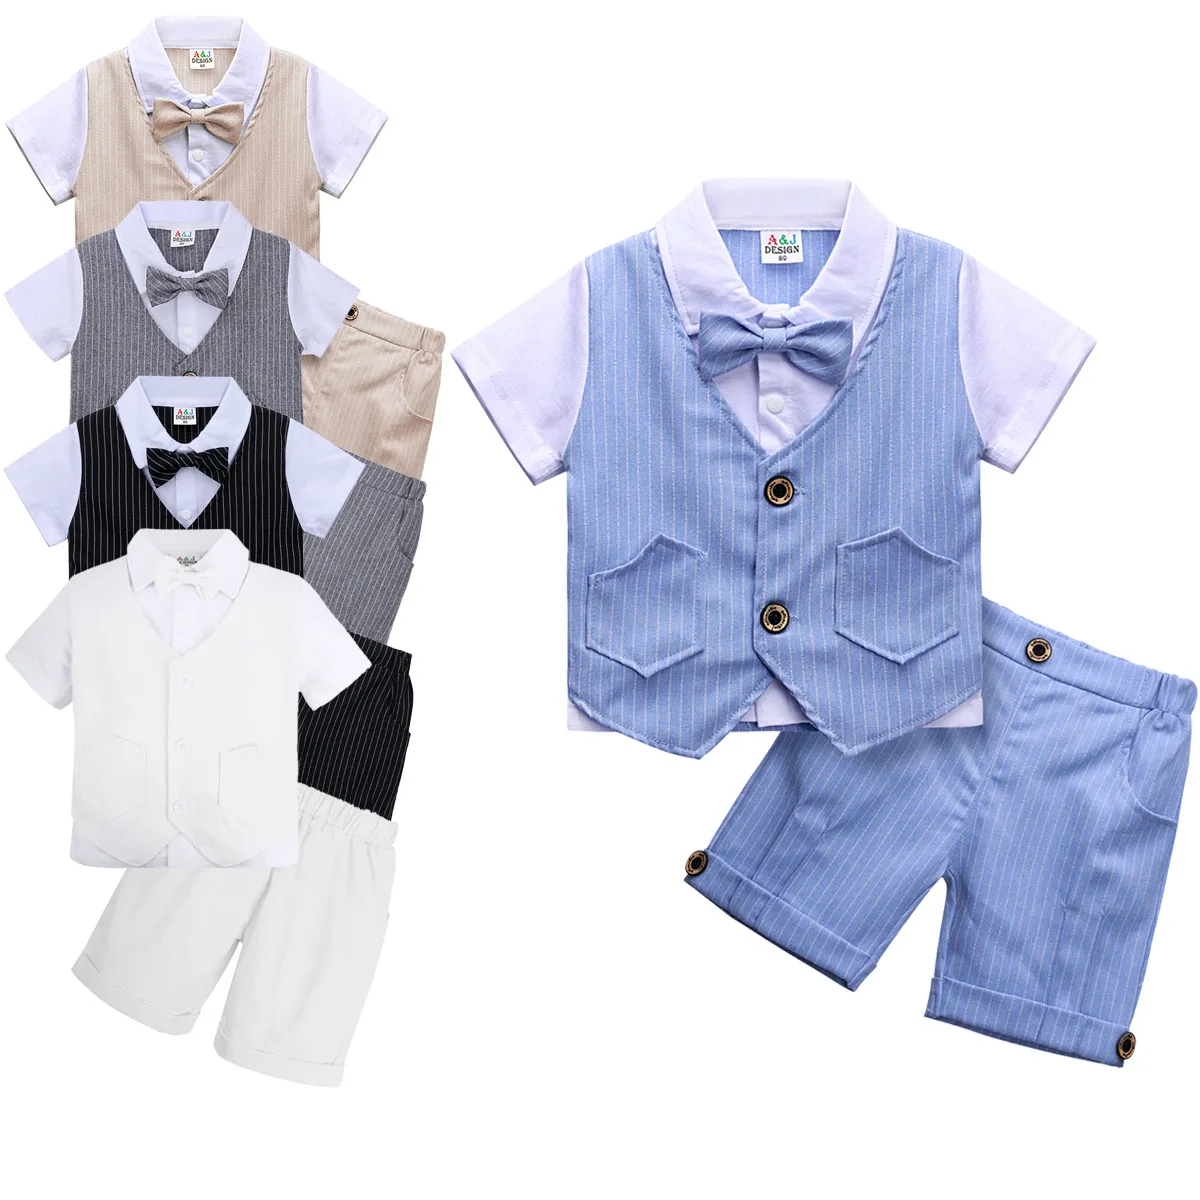 Baby Boys Clothing Set Infant Gentleman Outfit Top + Shorts Baptism Wedding Birthday Gift Costume 2PCS Kids Summer Clothes Suit